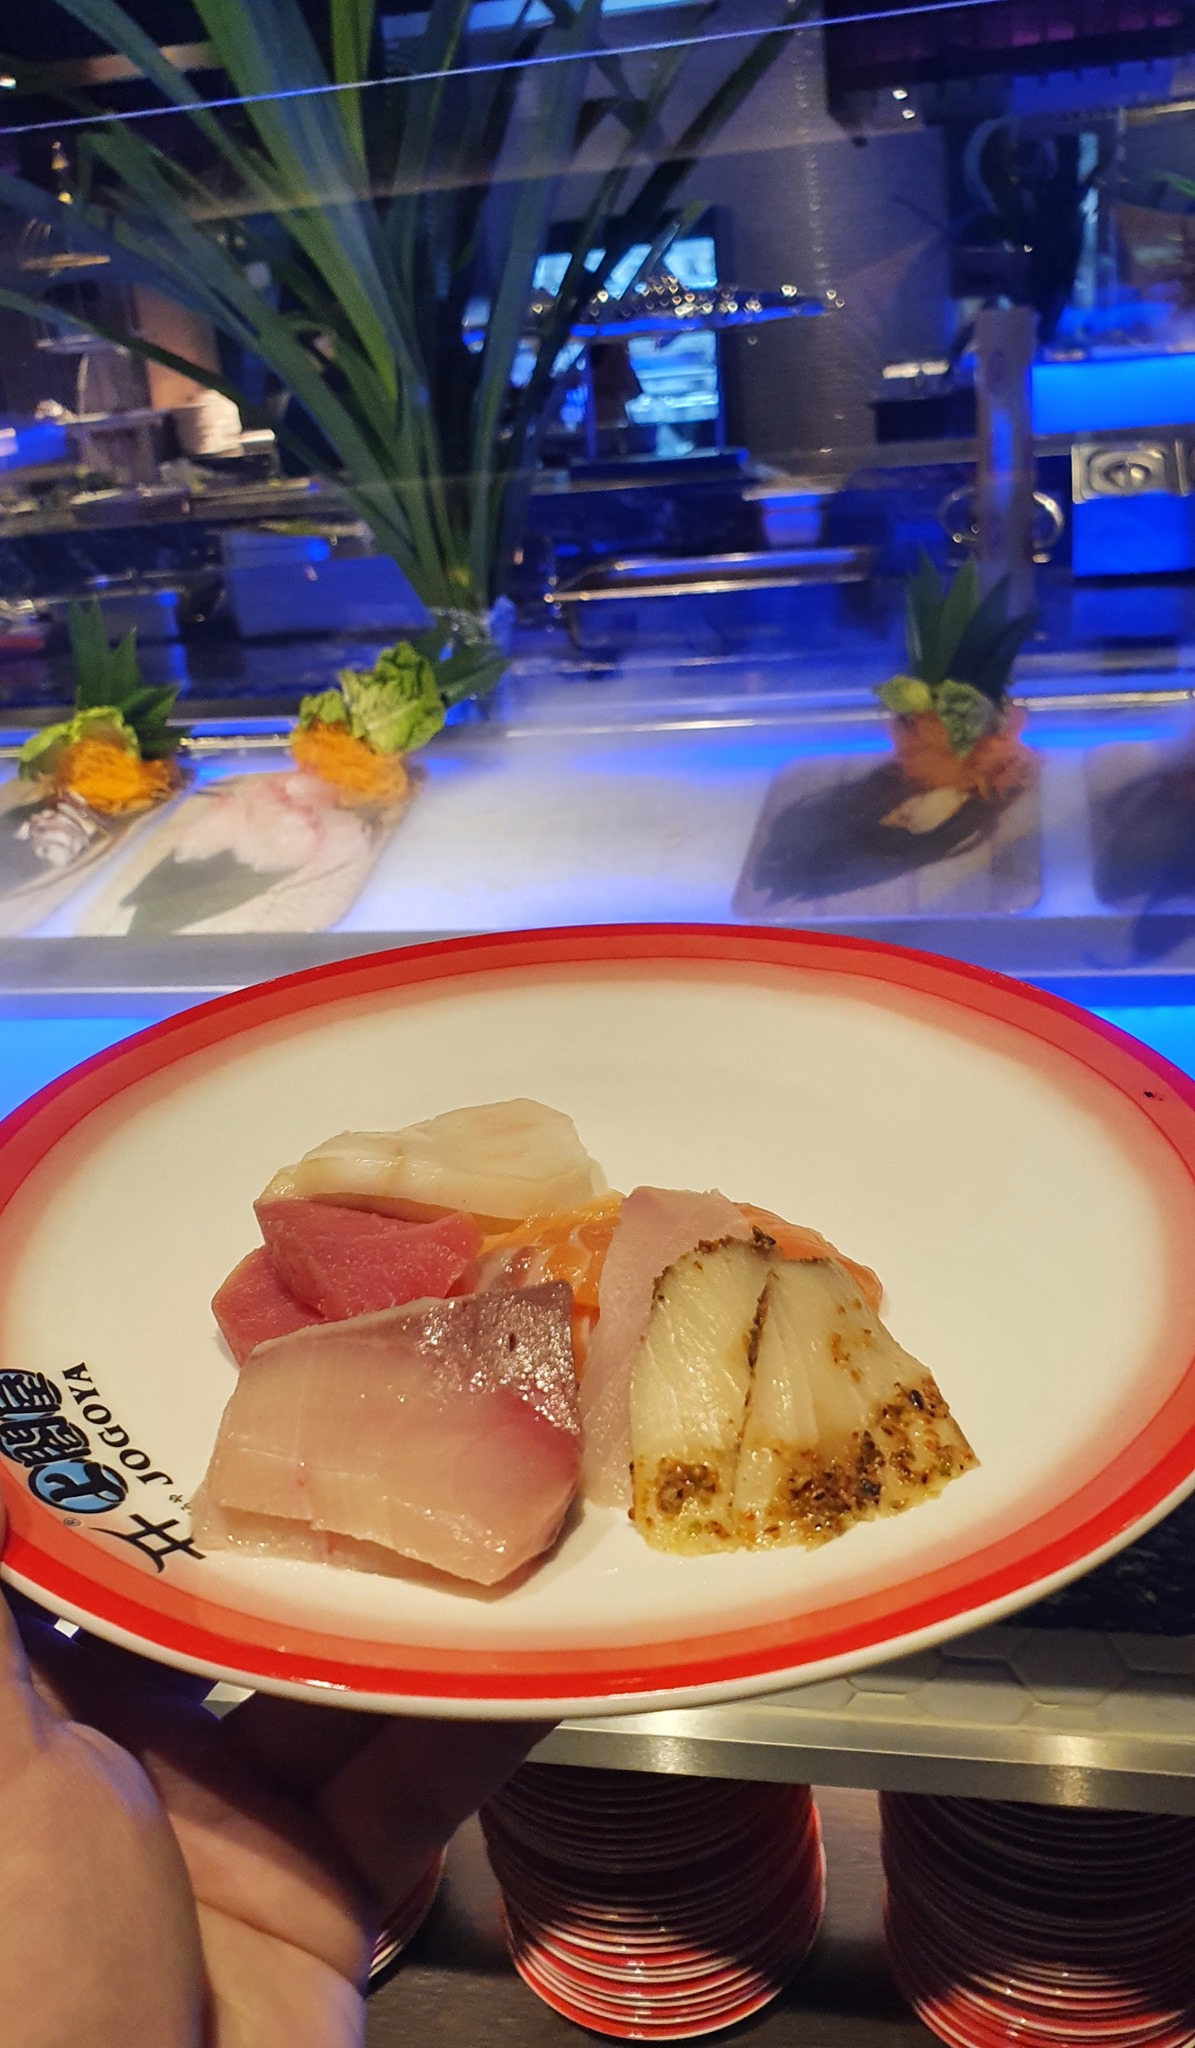 Is jogoya the top japanese buffet place? This food blogger doesn't think so